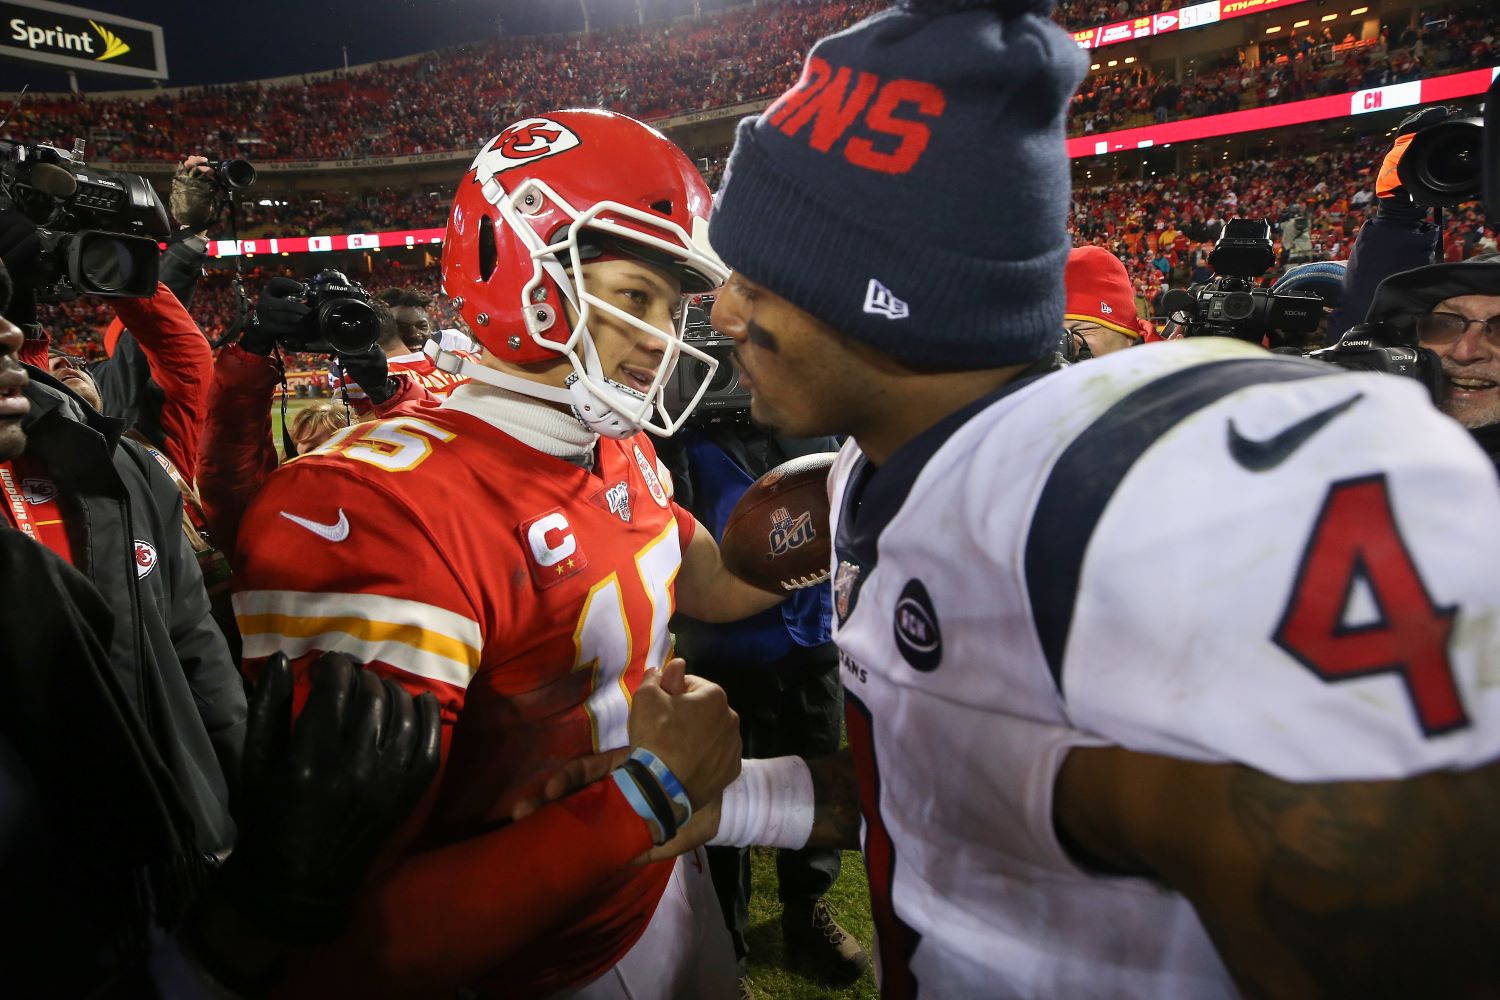 The Houston Texans desperately need the Chiefs to grant their franchise-altering request for a favor to keep Deshaun Watson from leaving.